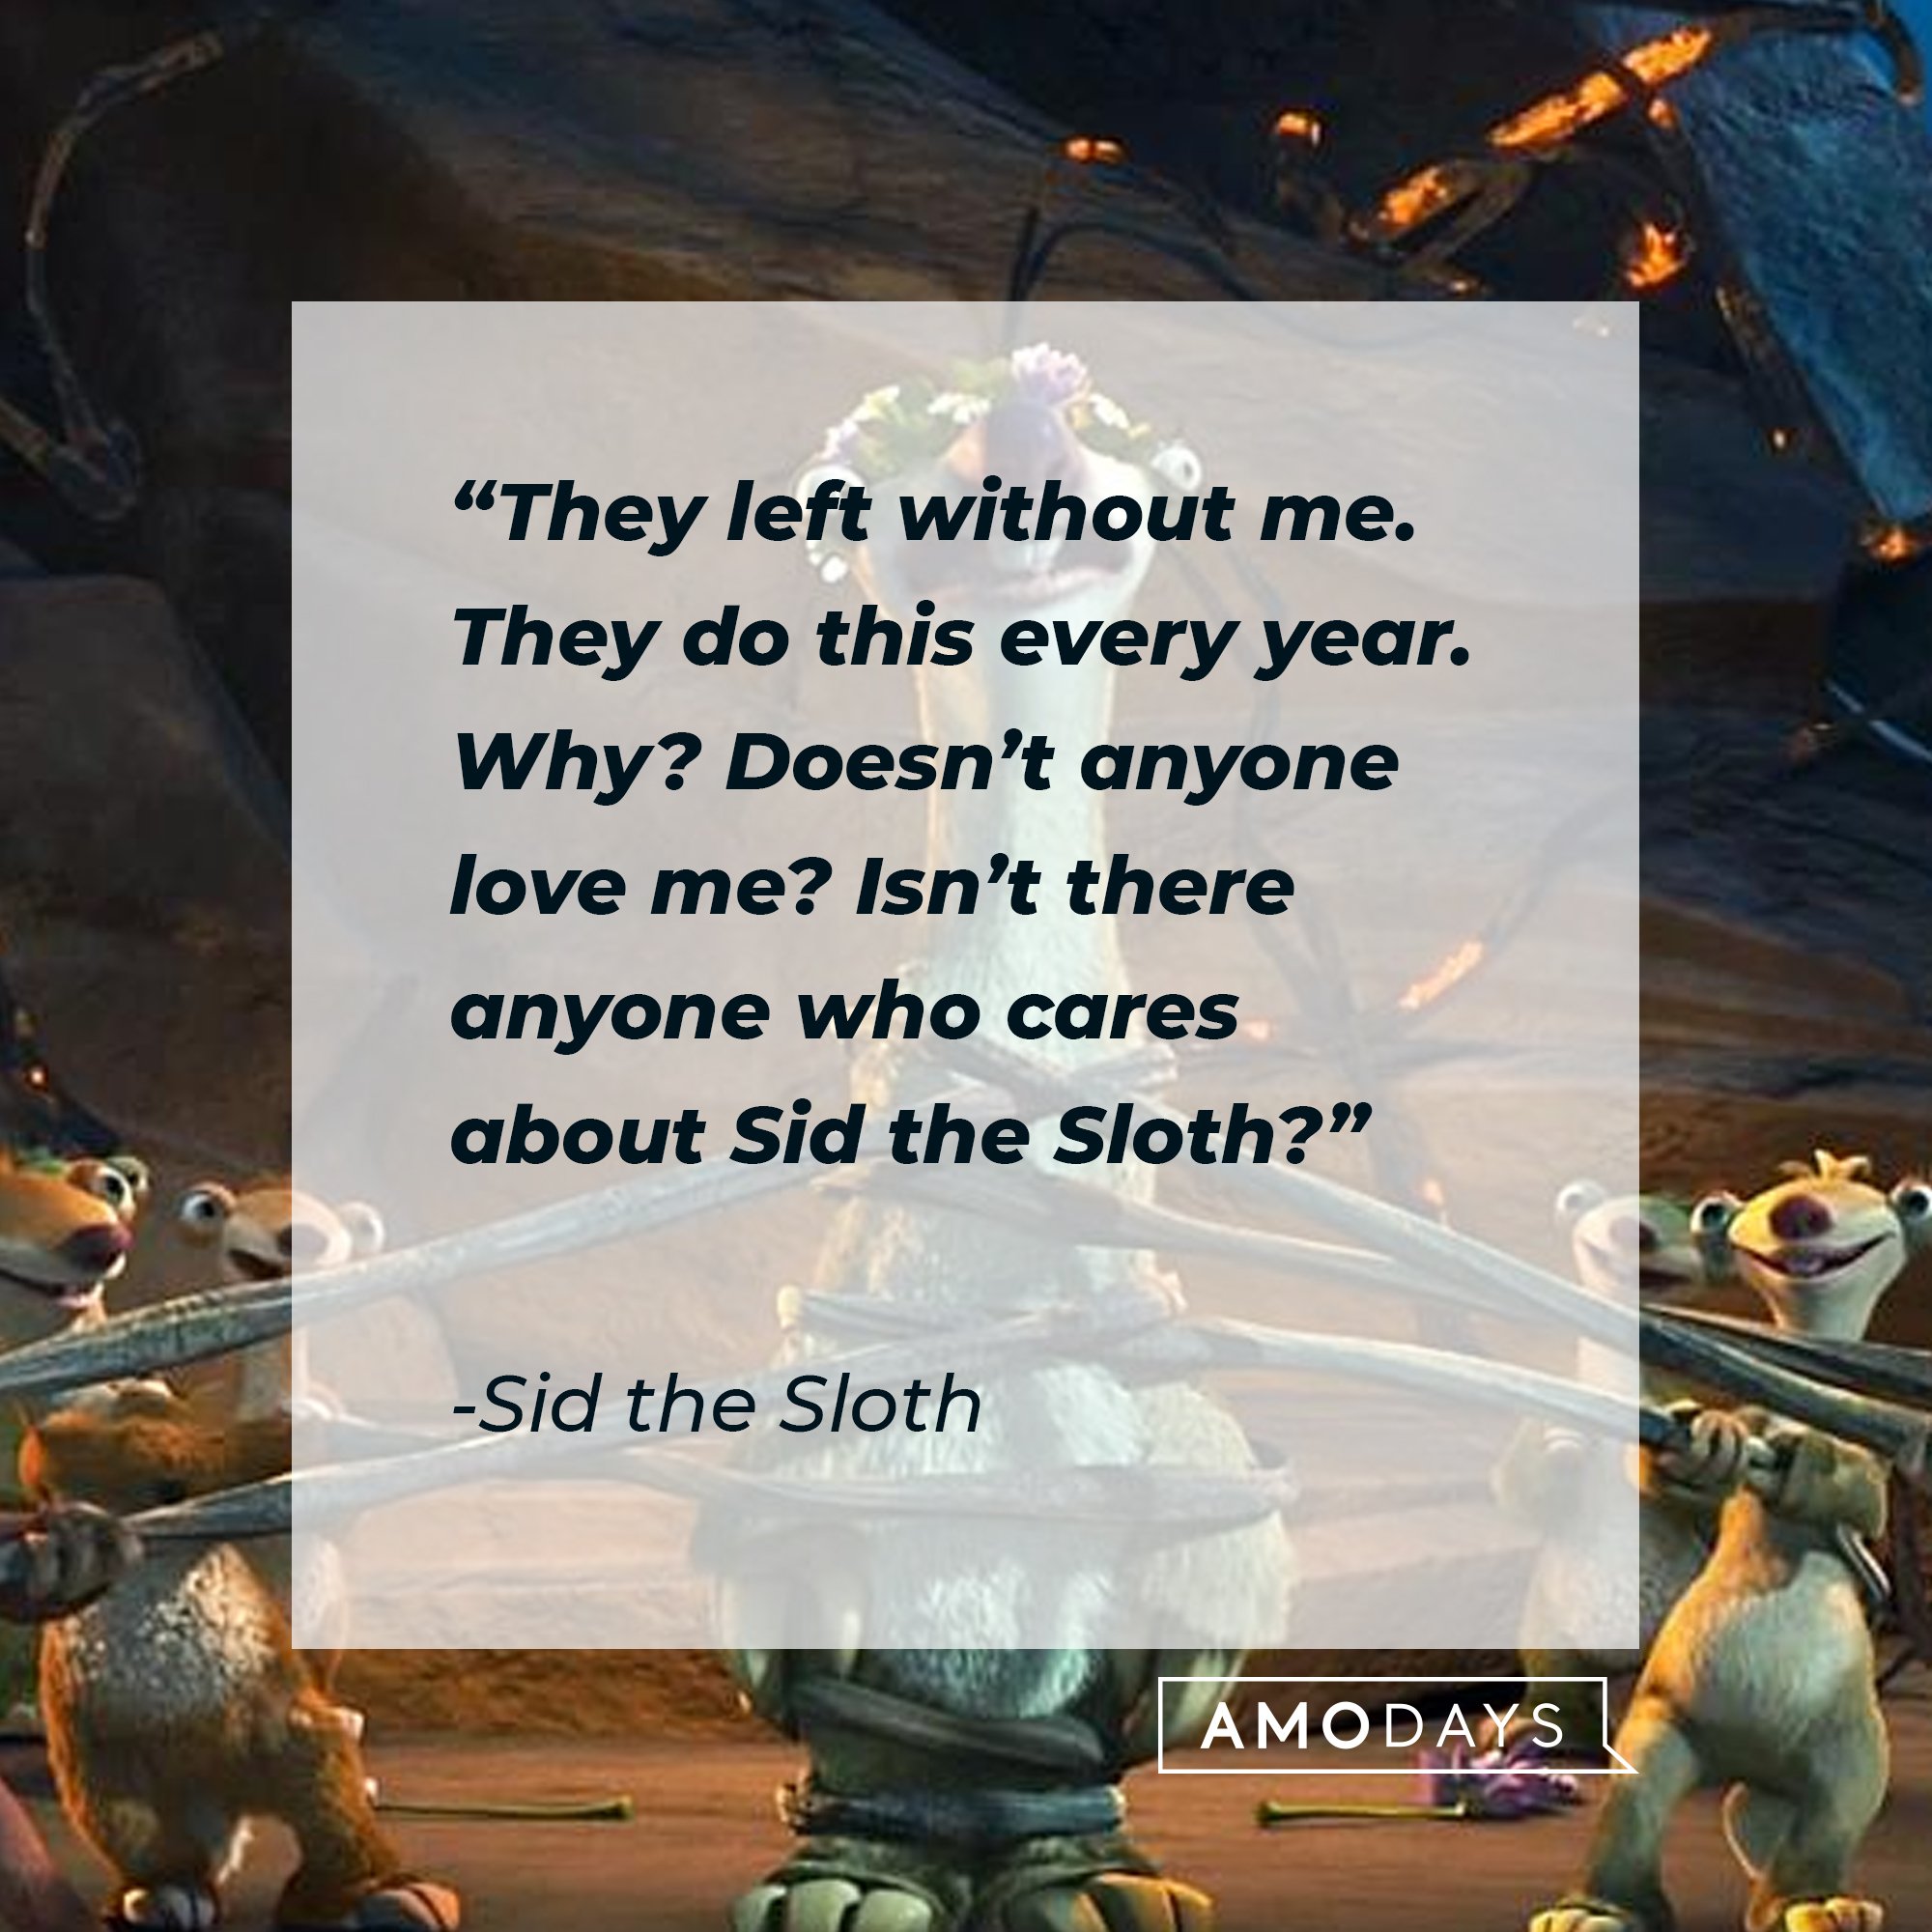 Sid the Sloth's quote: “They left without me. They do this every year. Why? Doesn’t anyone love me? Isn’t there anyone who cares about Sid the Sloth?” | Image: AmoDays